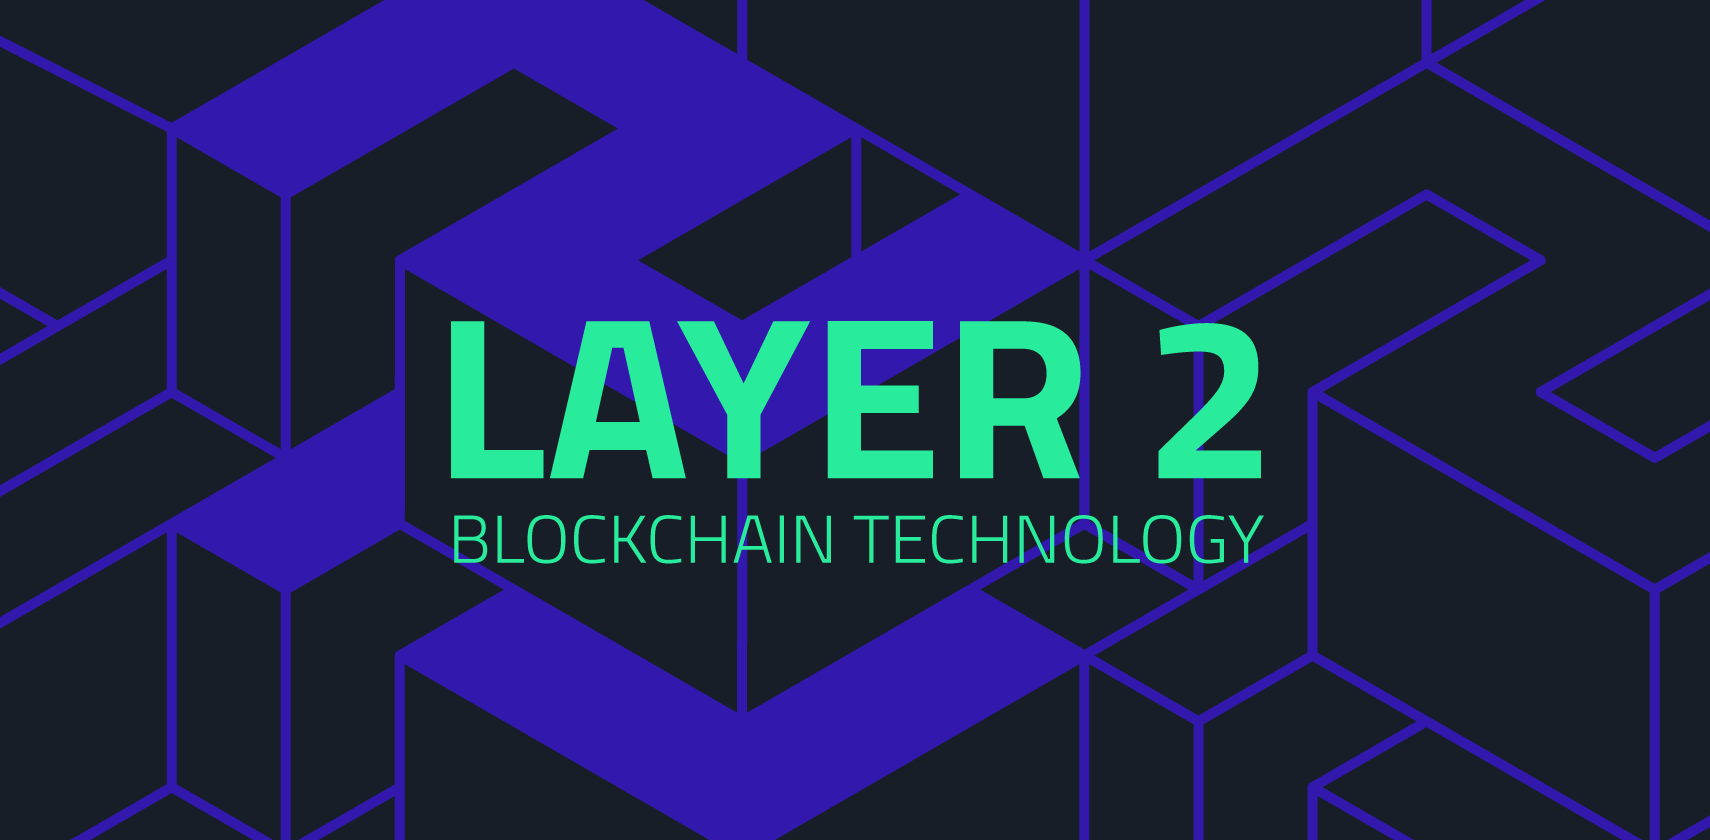 5 Best Layer 2 Crypto to Buy Now - December 2021 - InsideBitcoins.com